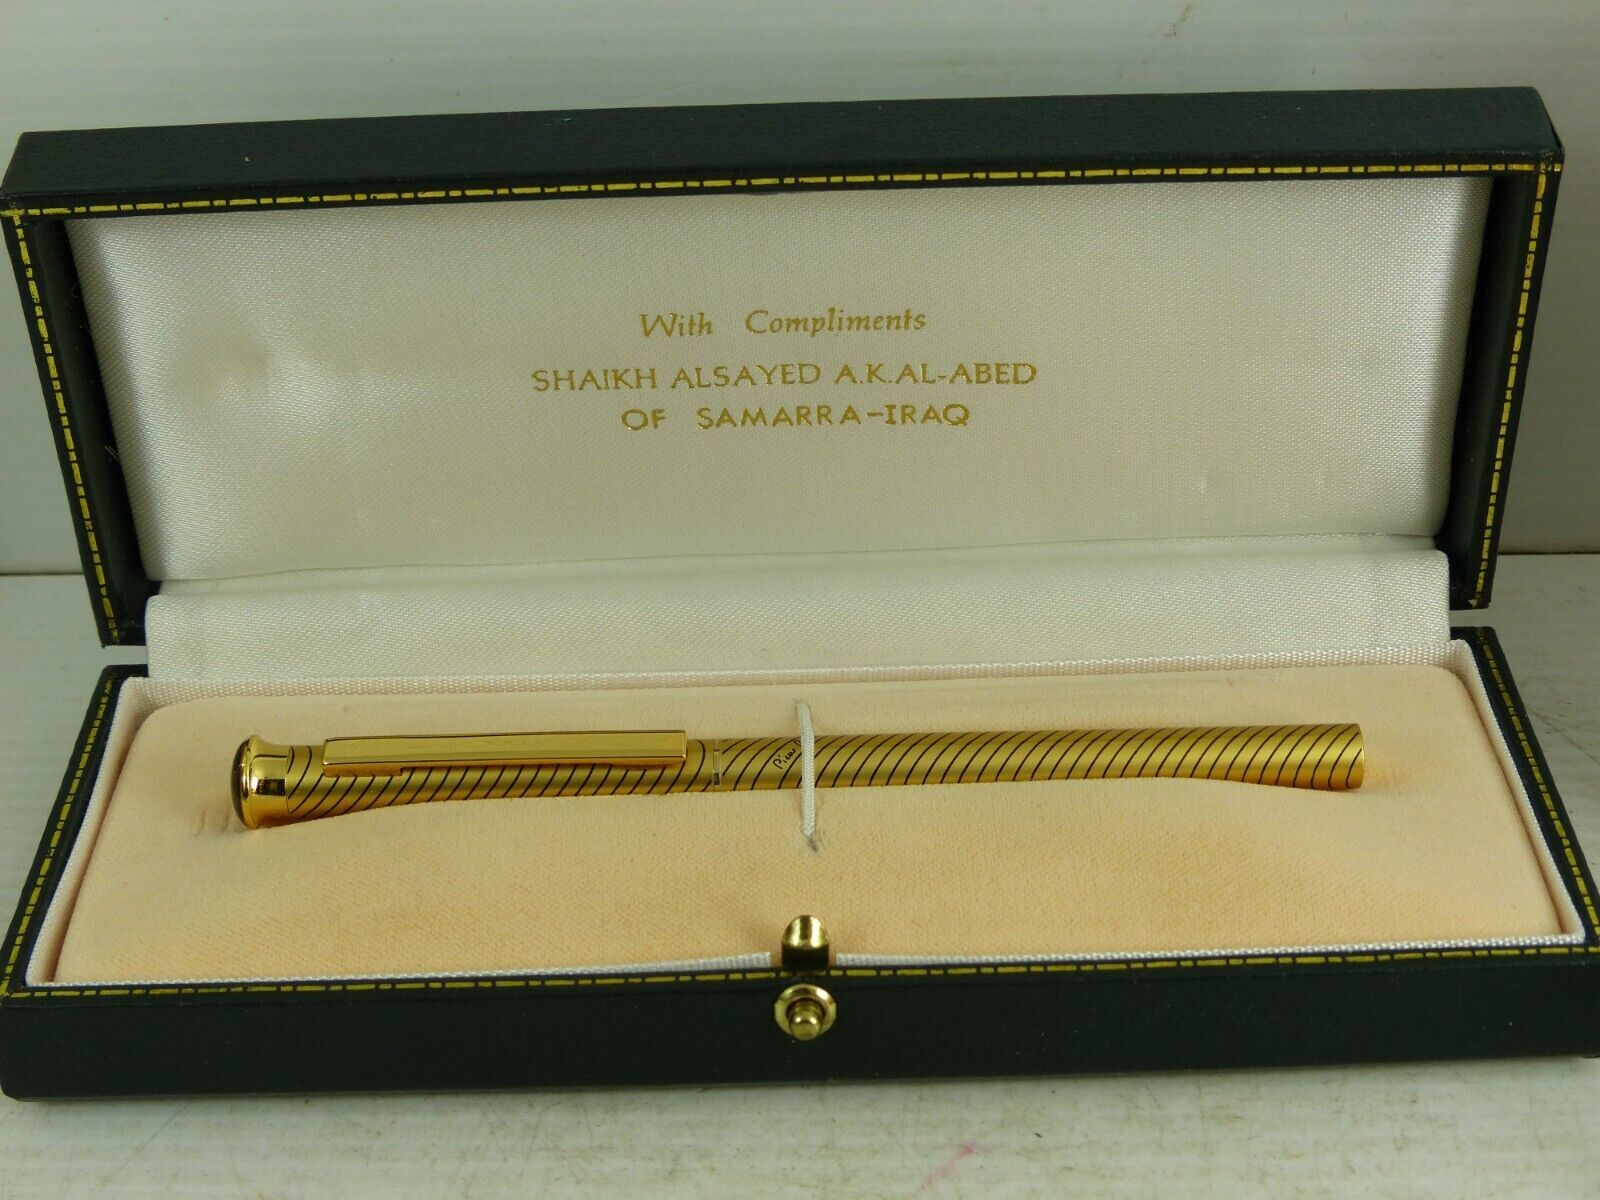 PIERRE CARDIN SILVER PEN PRESENTED BY SHAIKH ALSAYED A.K AL-ABED VERY RARE L@@K